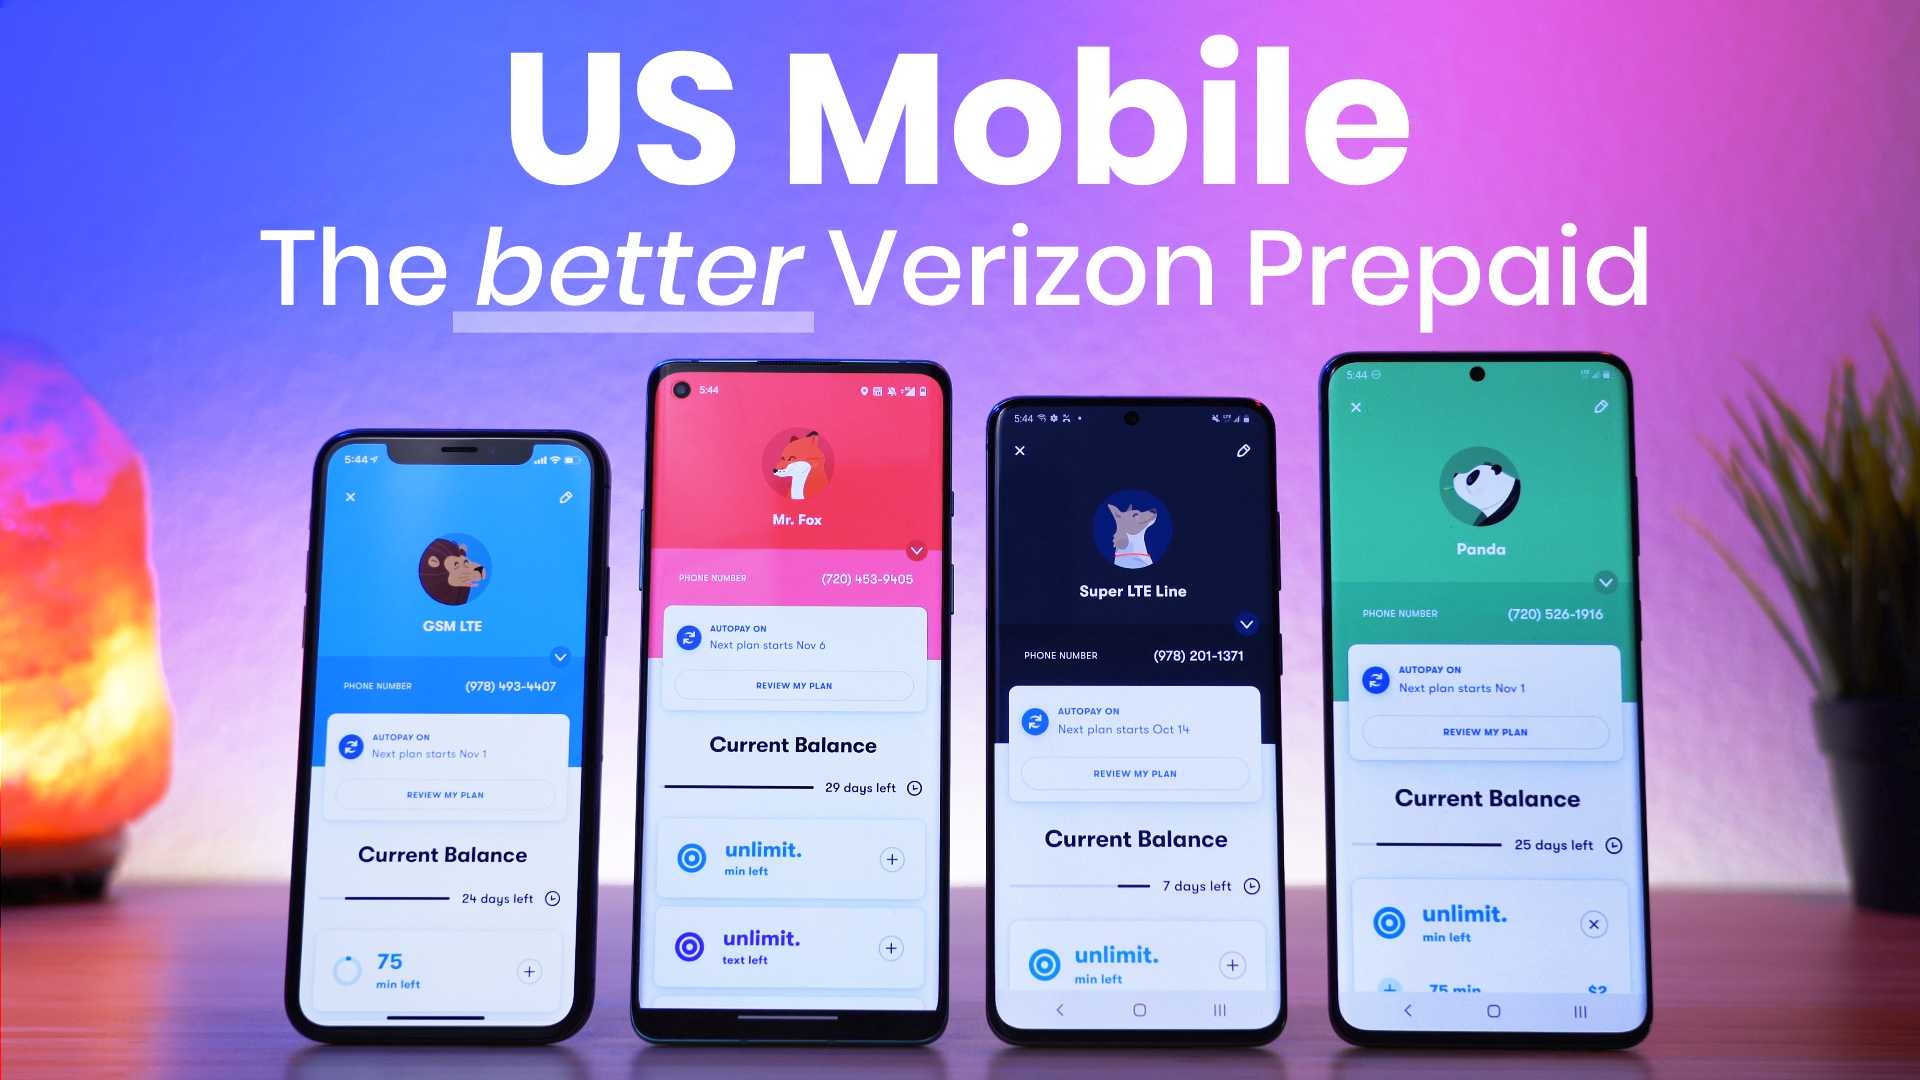 prepaid-carrier-us-mobile-looks-to-add-verizon-coverage-this-summer